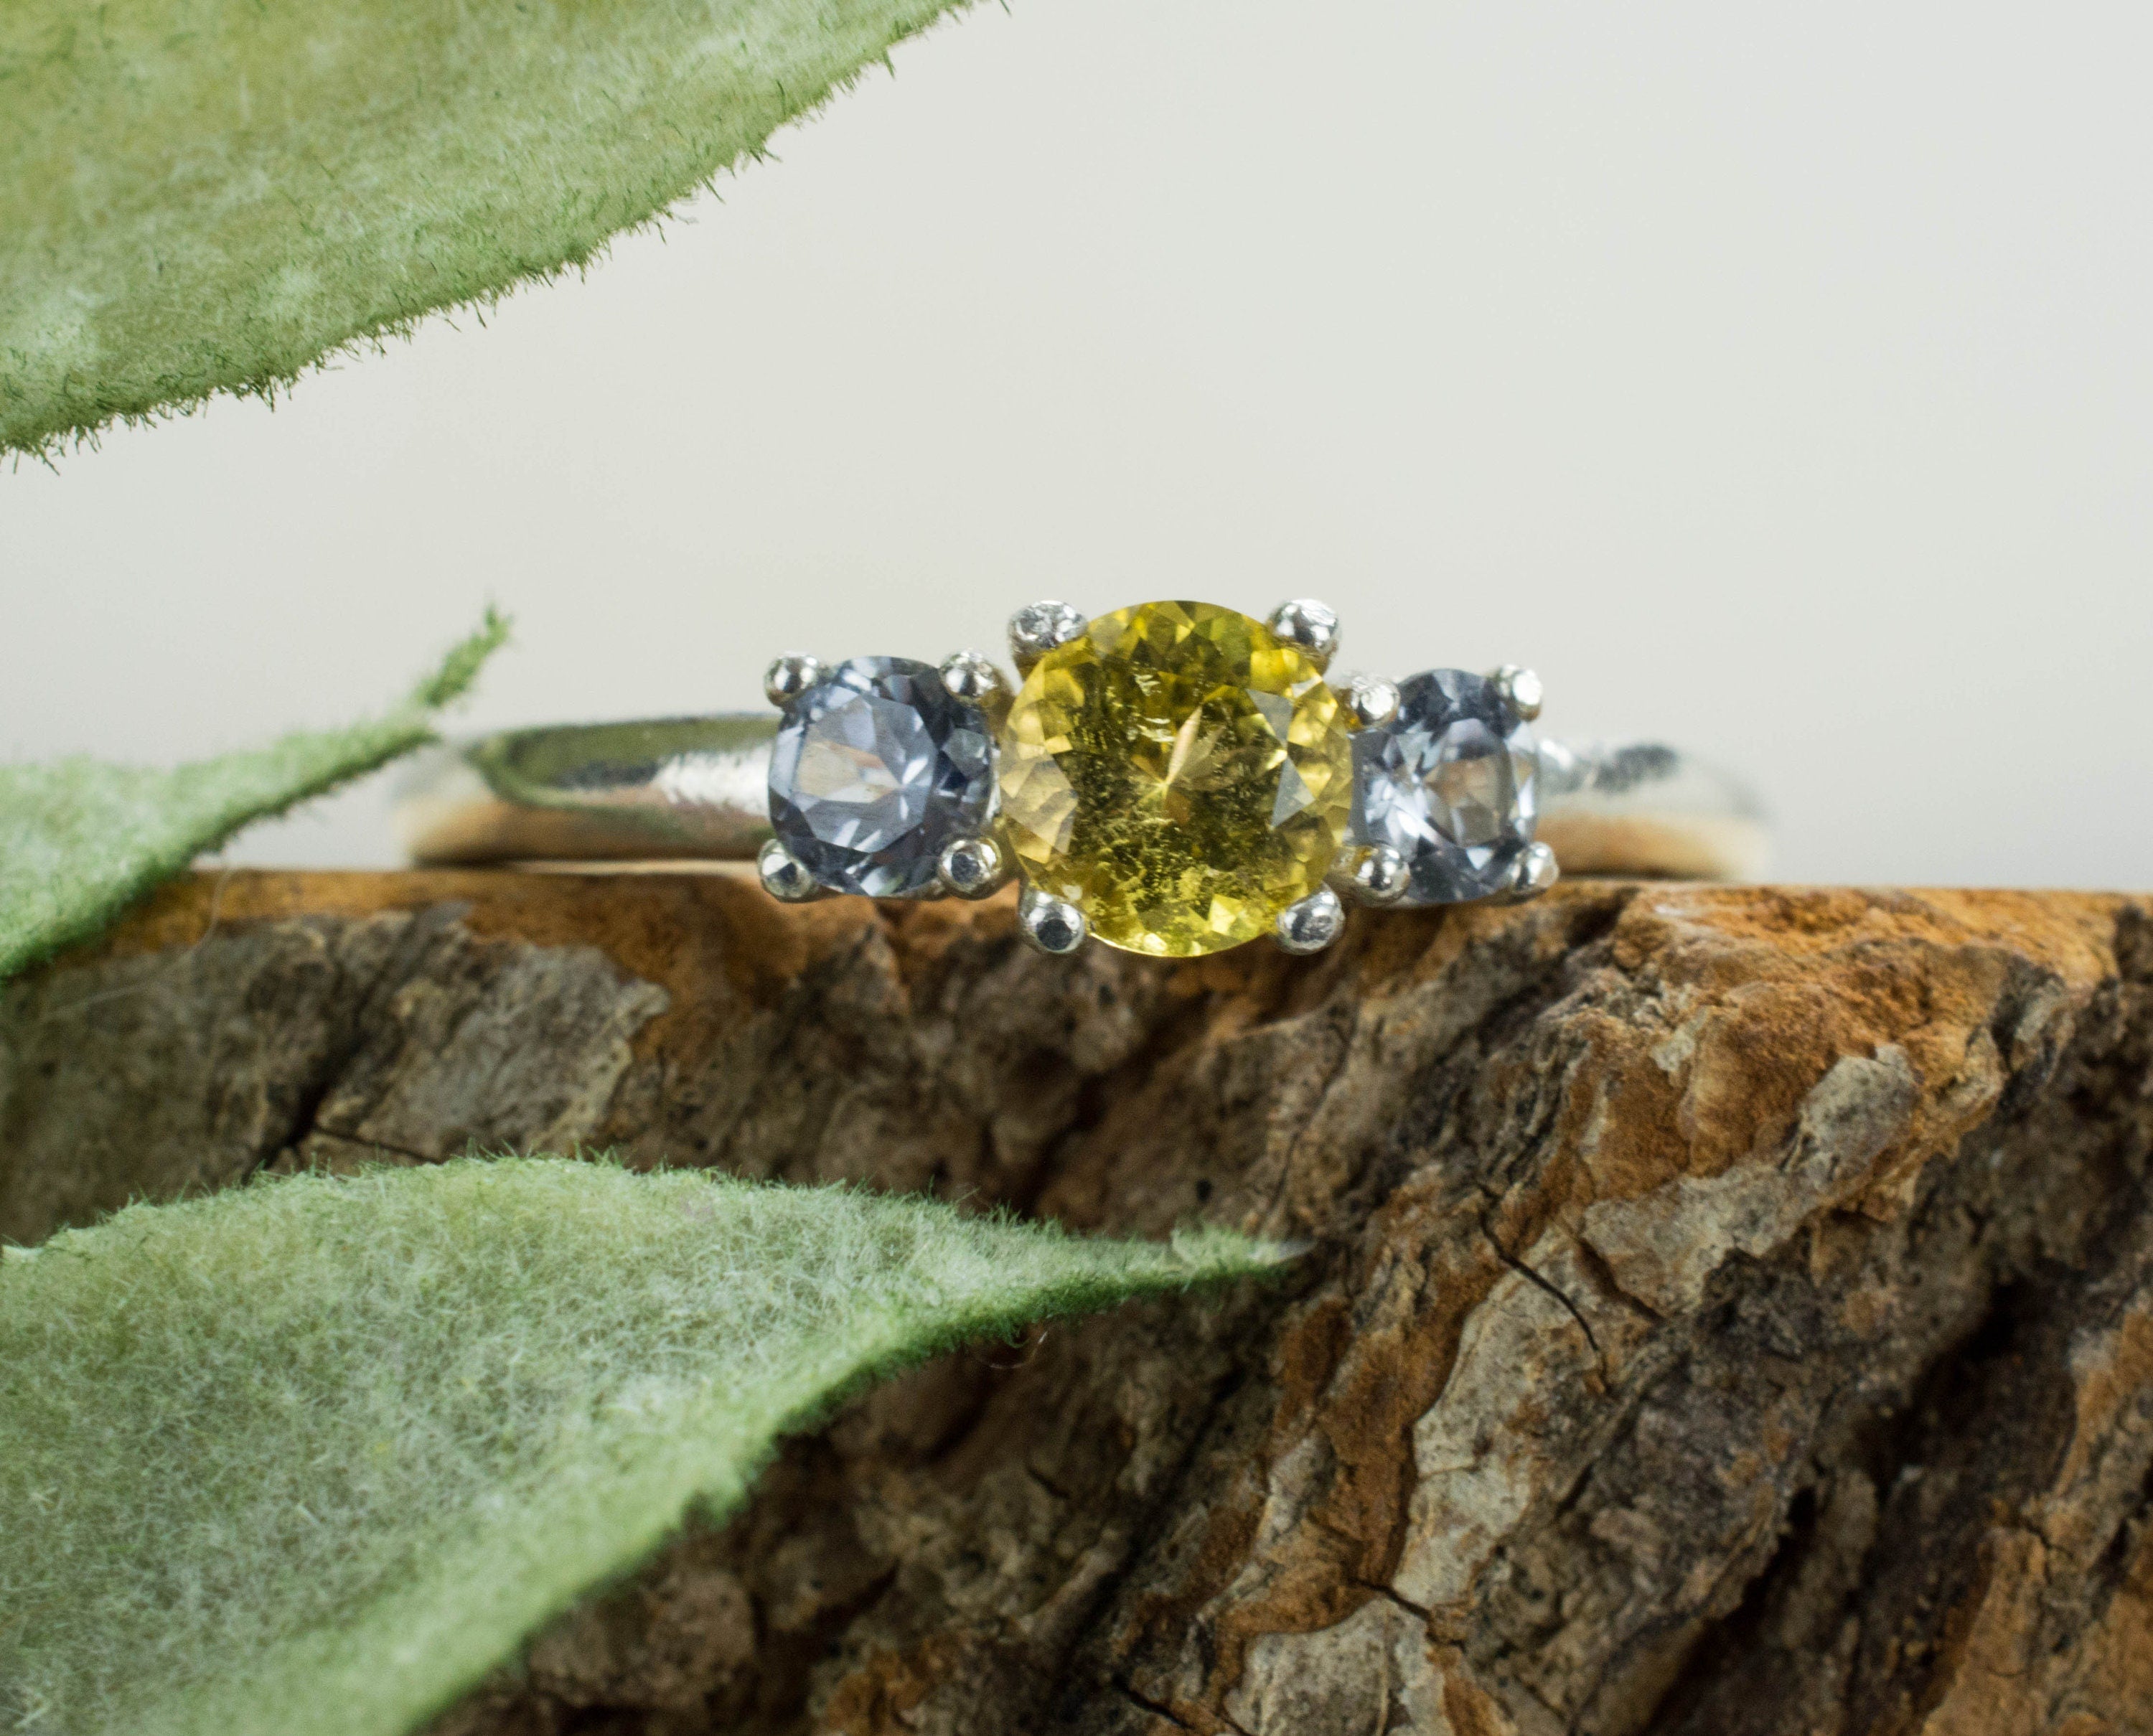 Yellow Tourmaline and Gray Spinel Sterling Silver Ring, Genuine Untreated Tourmaline and Spinel; Gray Spinel Ring; Tourmaline Ring - Mark Oliver Gems